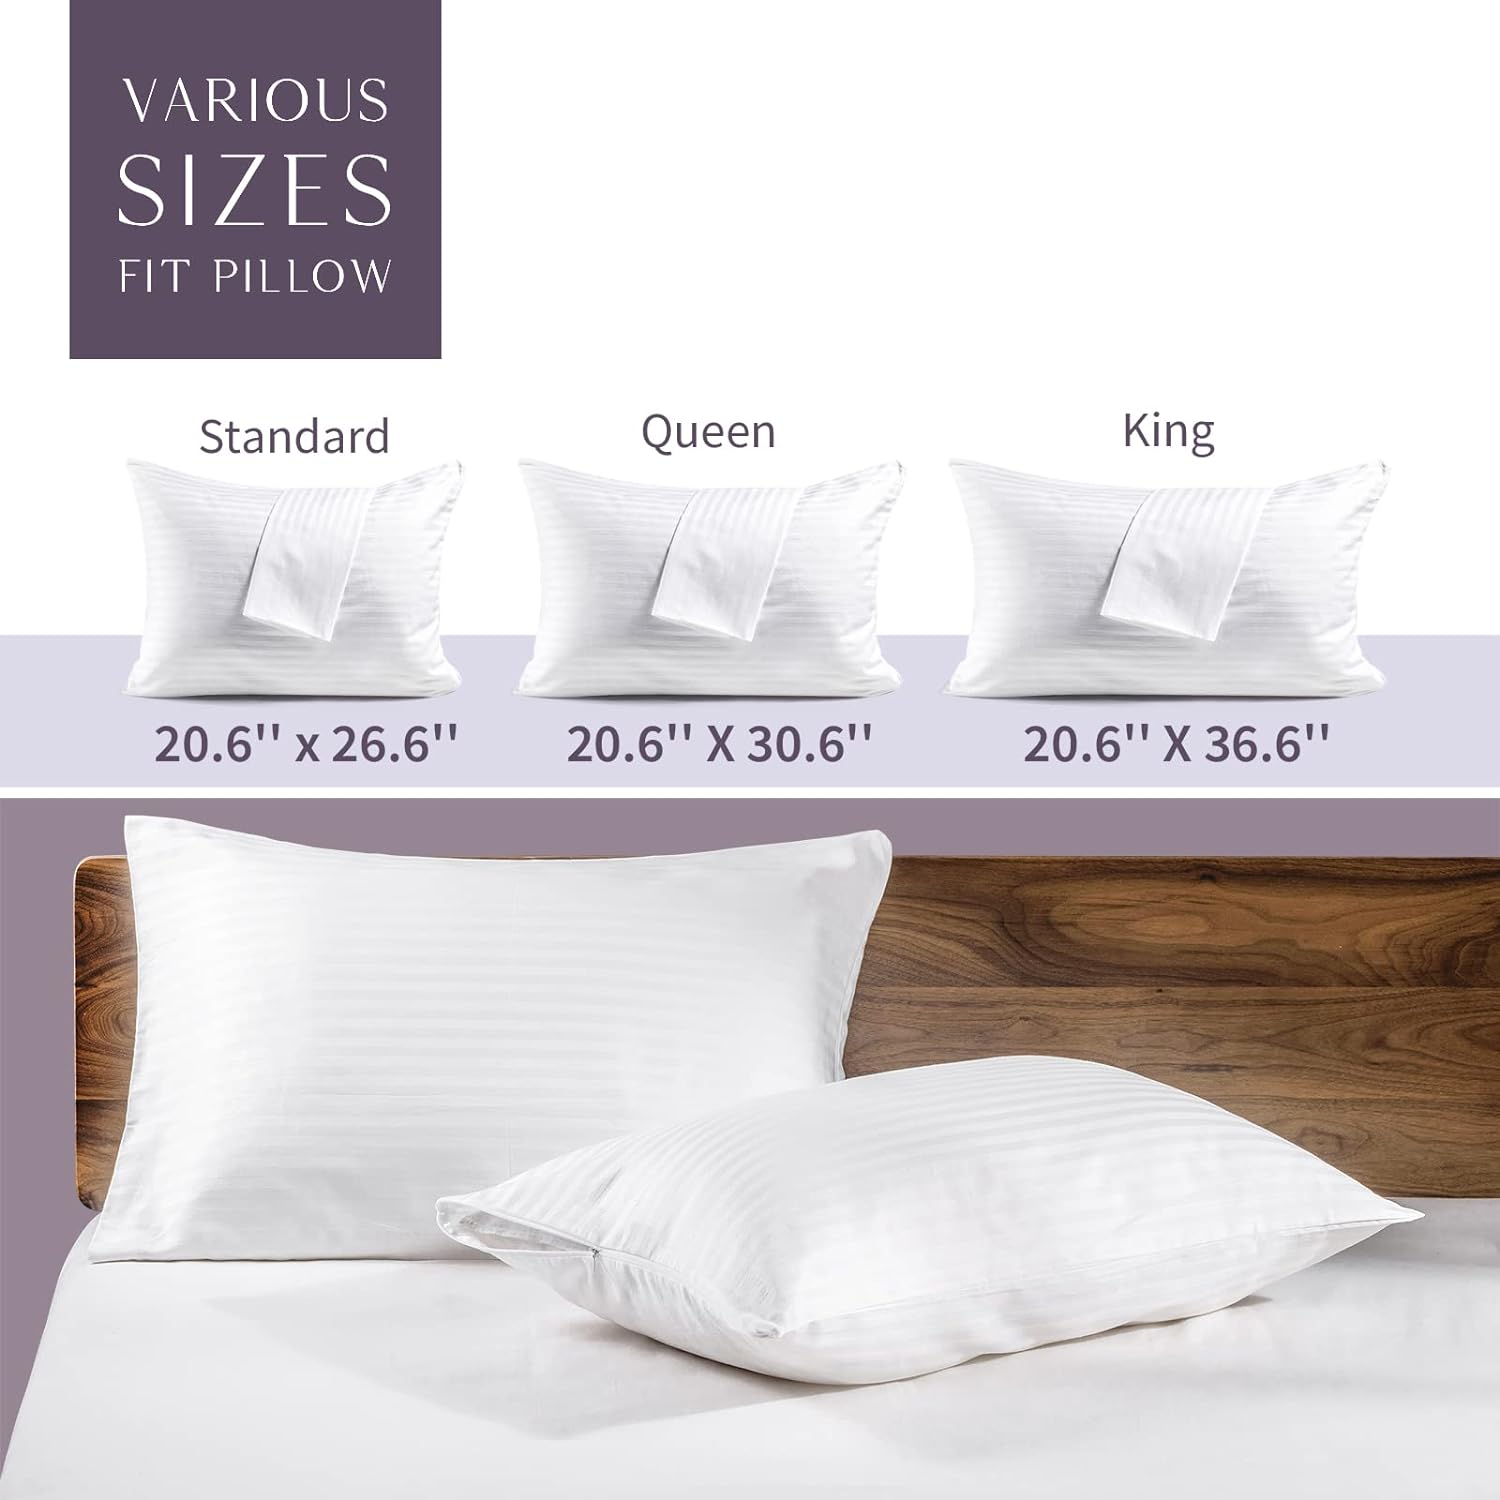 What Size Pillow For Queen Bed